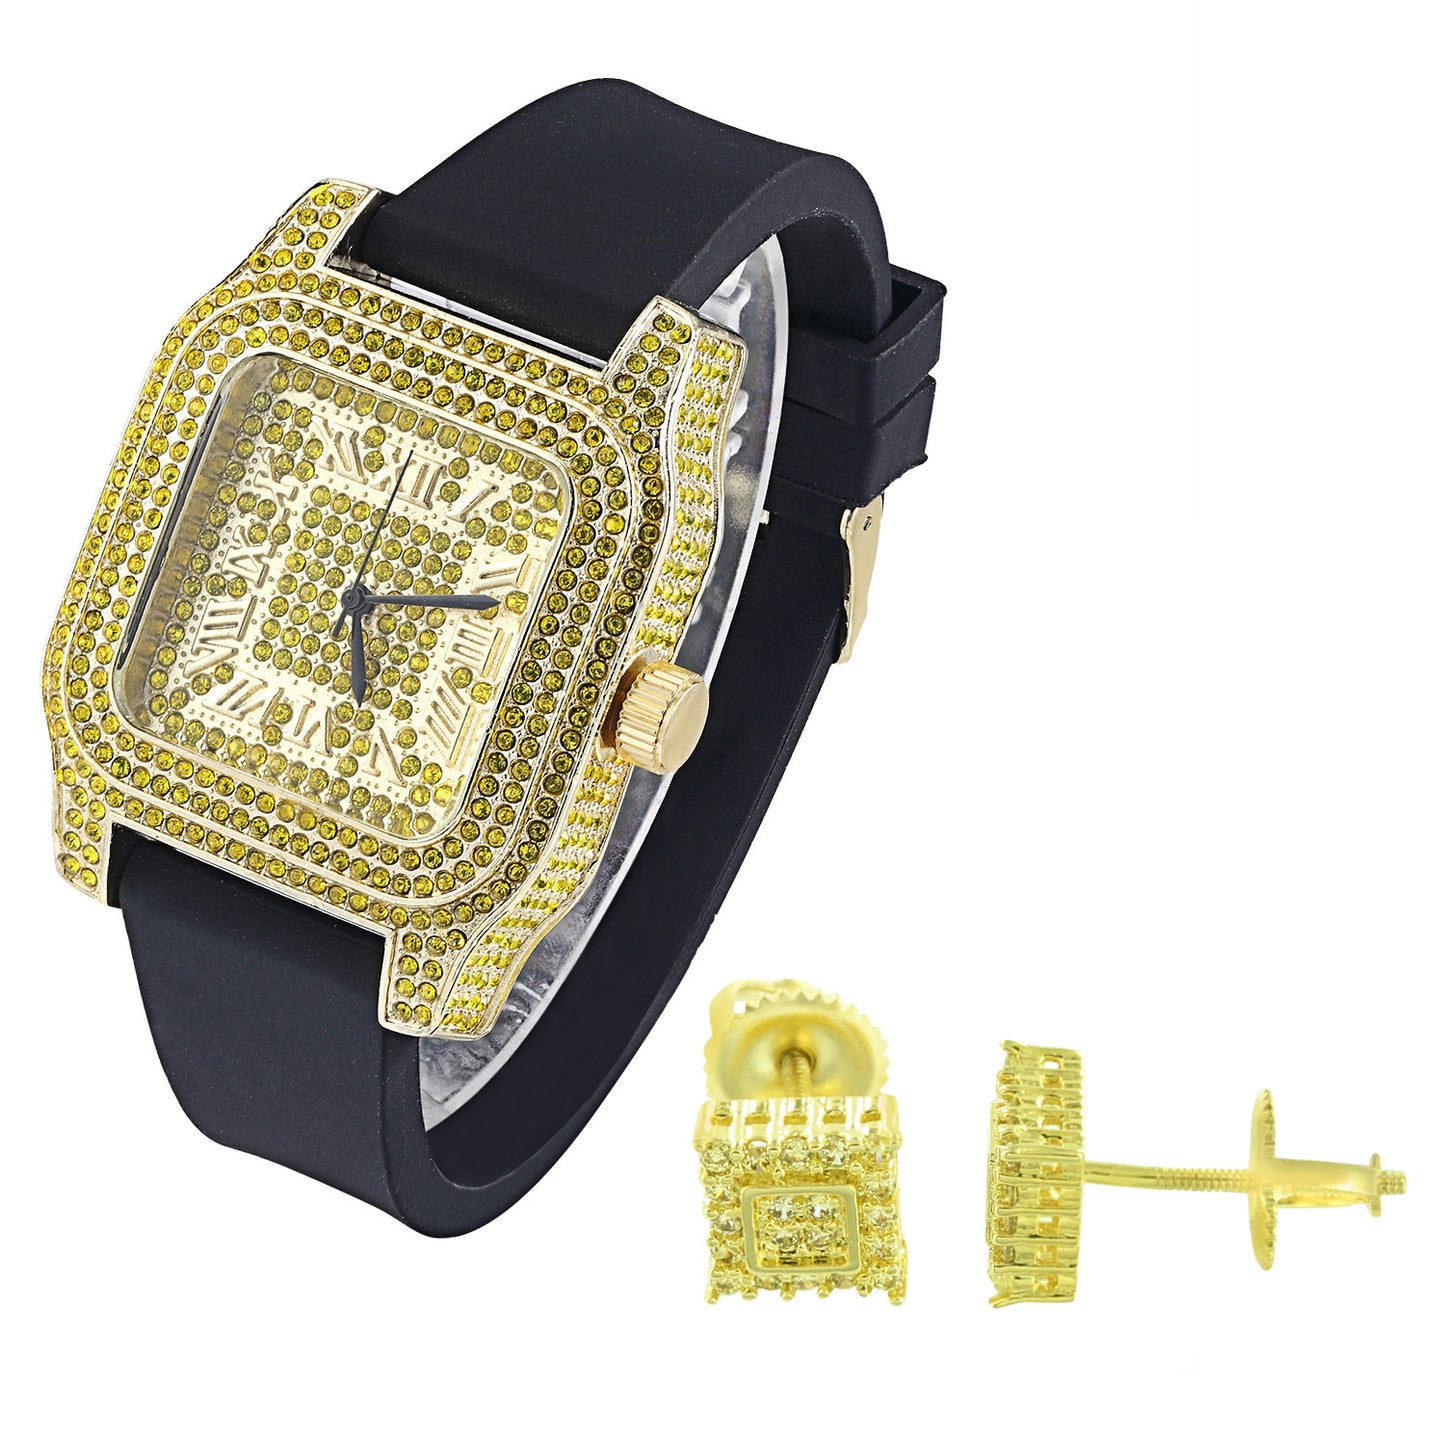 Men's Square Face 14k Yellow Canary Watch with Matching Earrings Combo Set